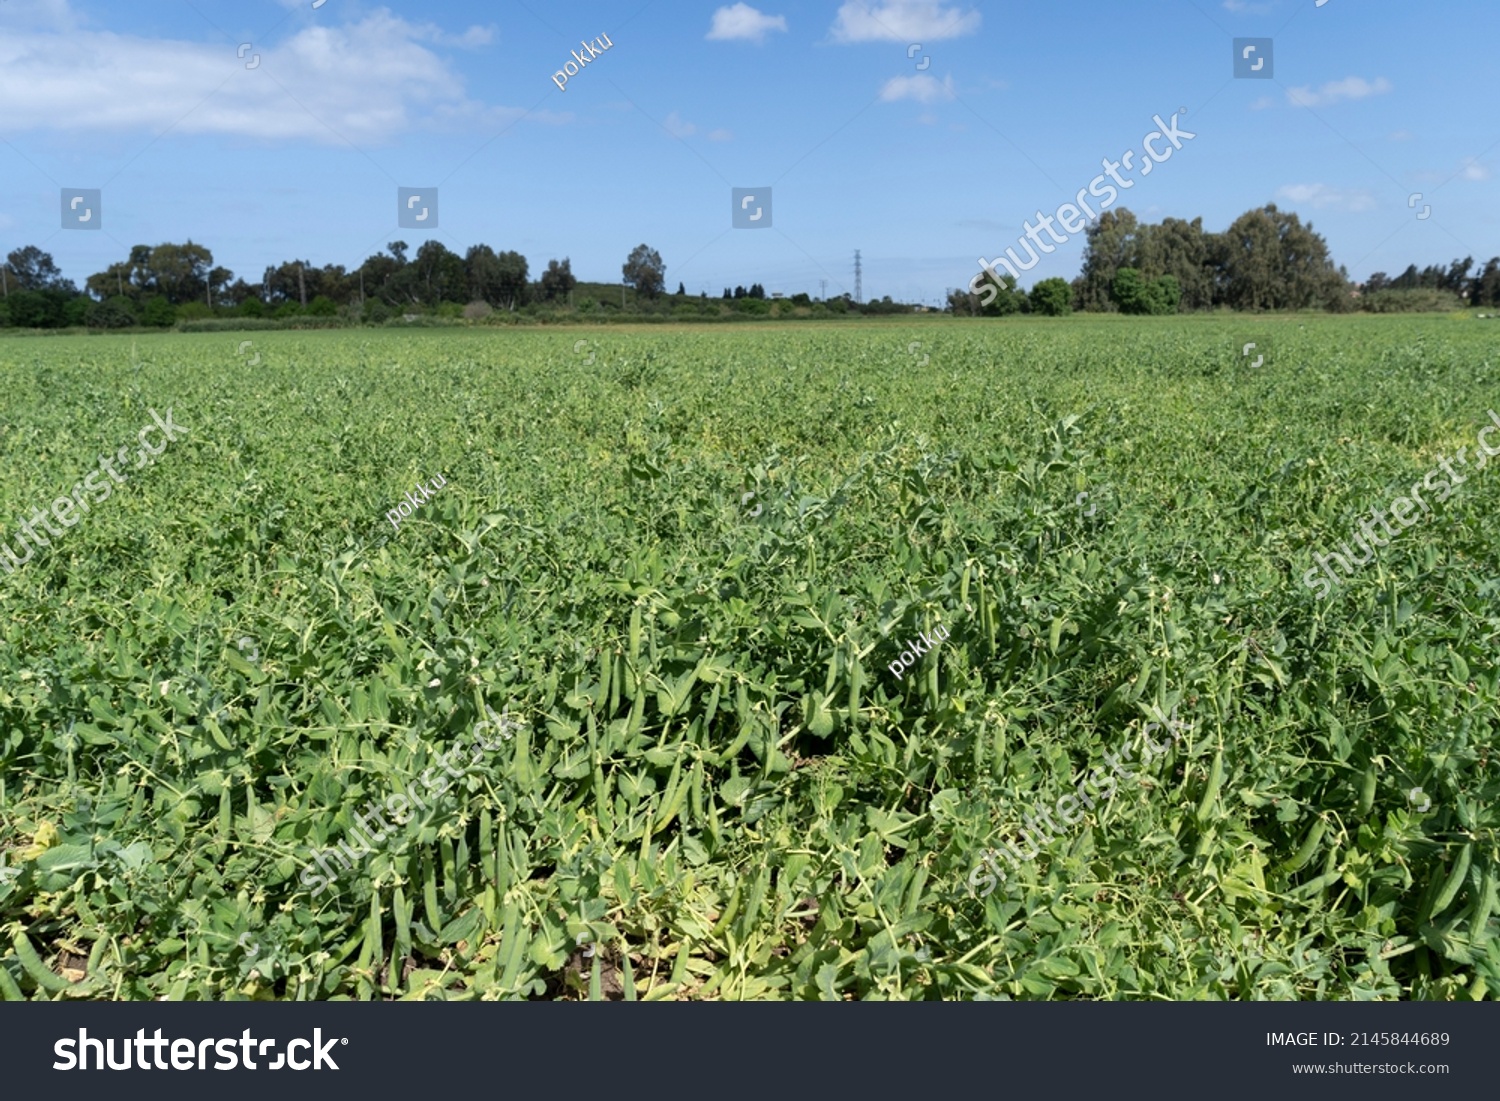 Green pea field at harvest time #2145844689